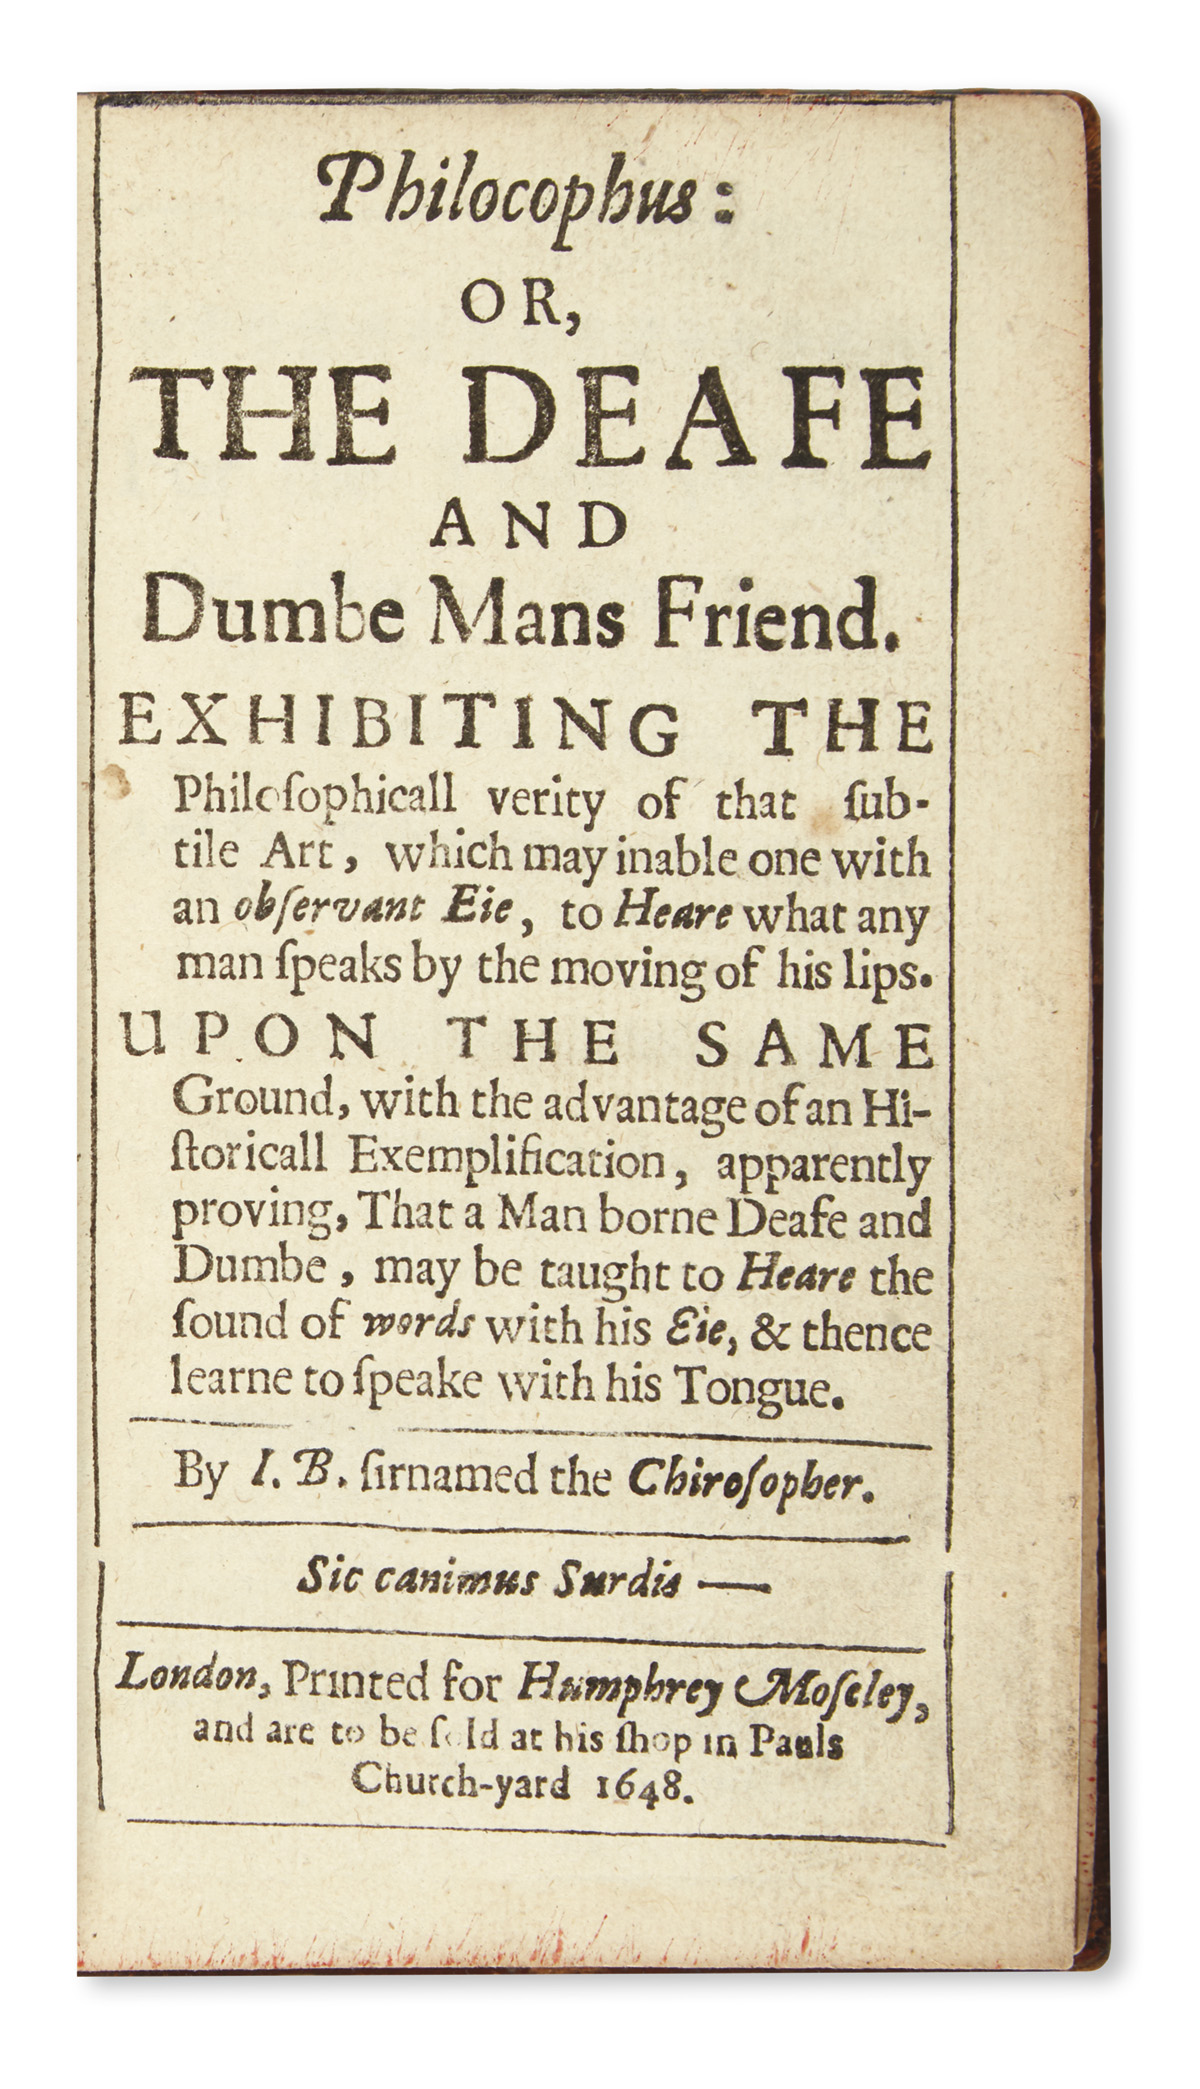 [BULWER, JOHN.]  Philocophus: or, The Deafe and Dumbe Mans Friend.  1648